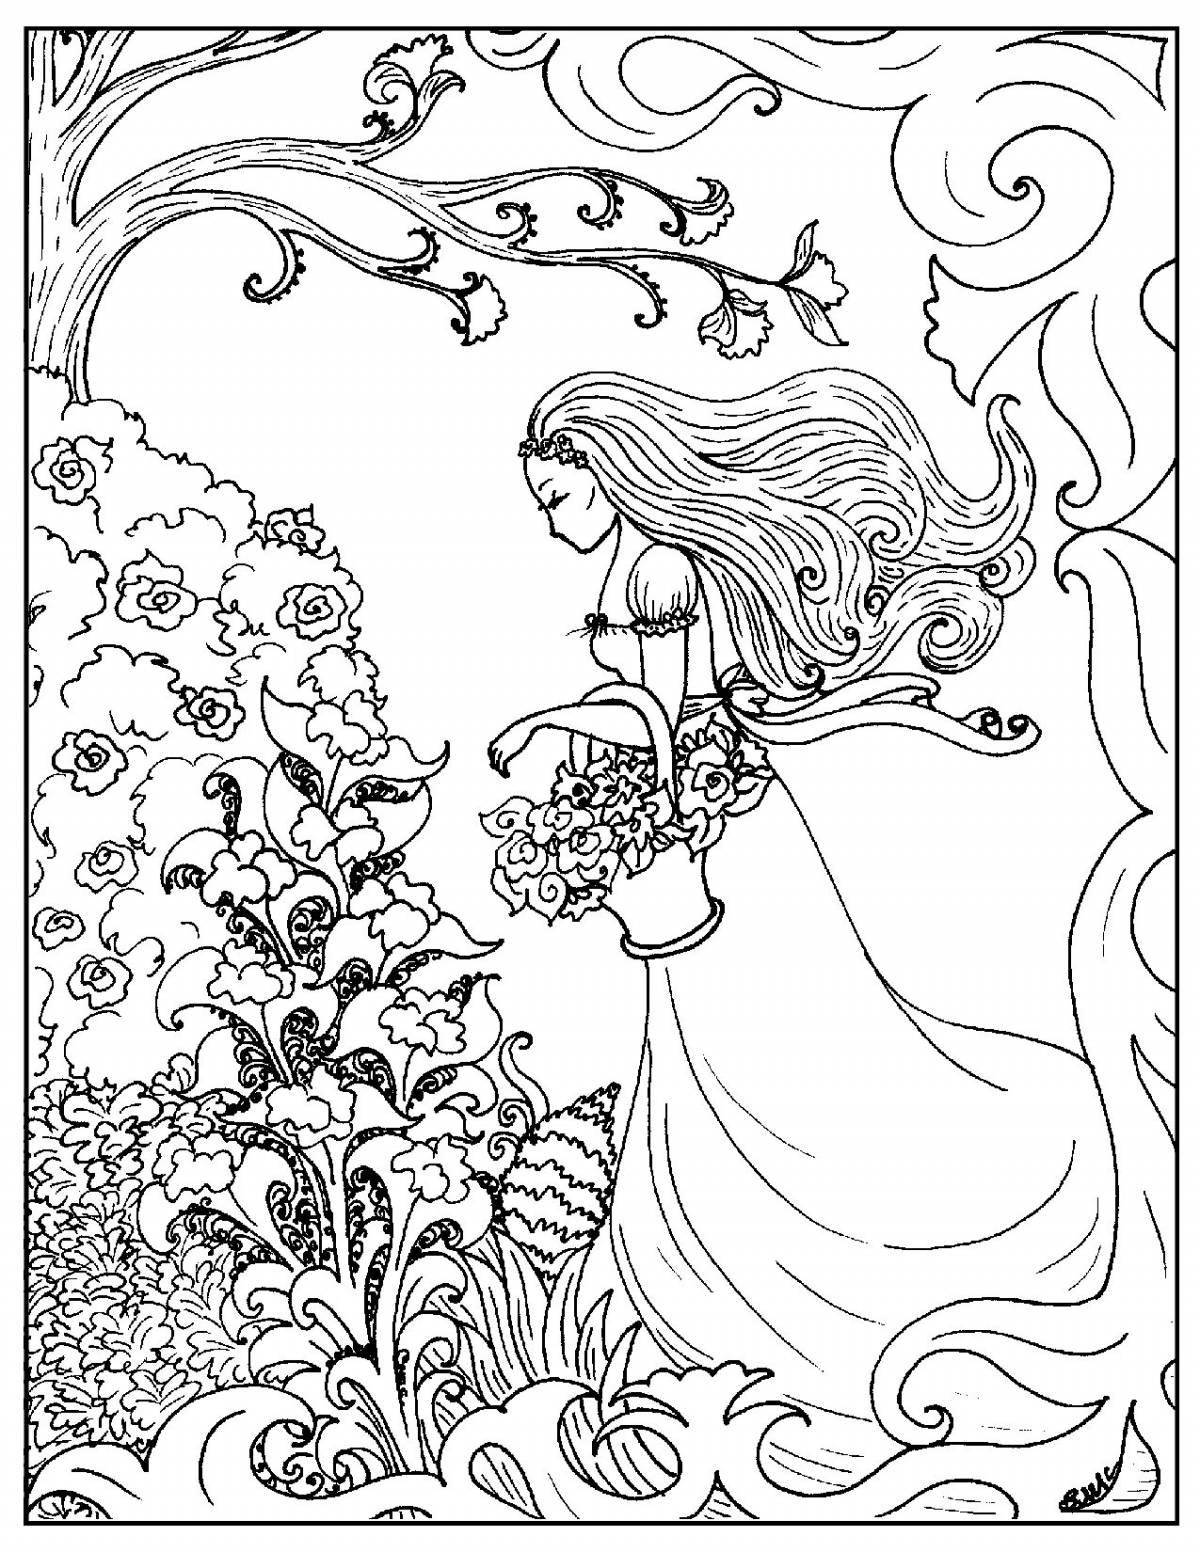 Joyful coloring pages girls in the forest